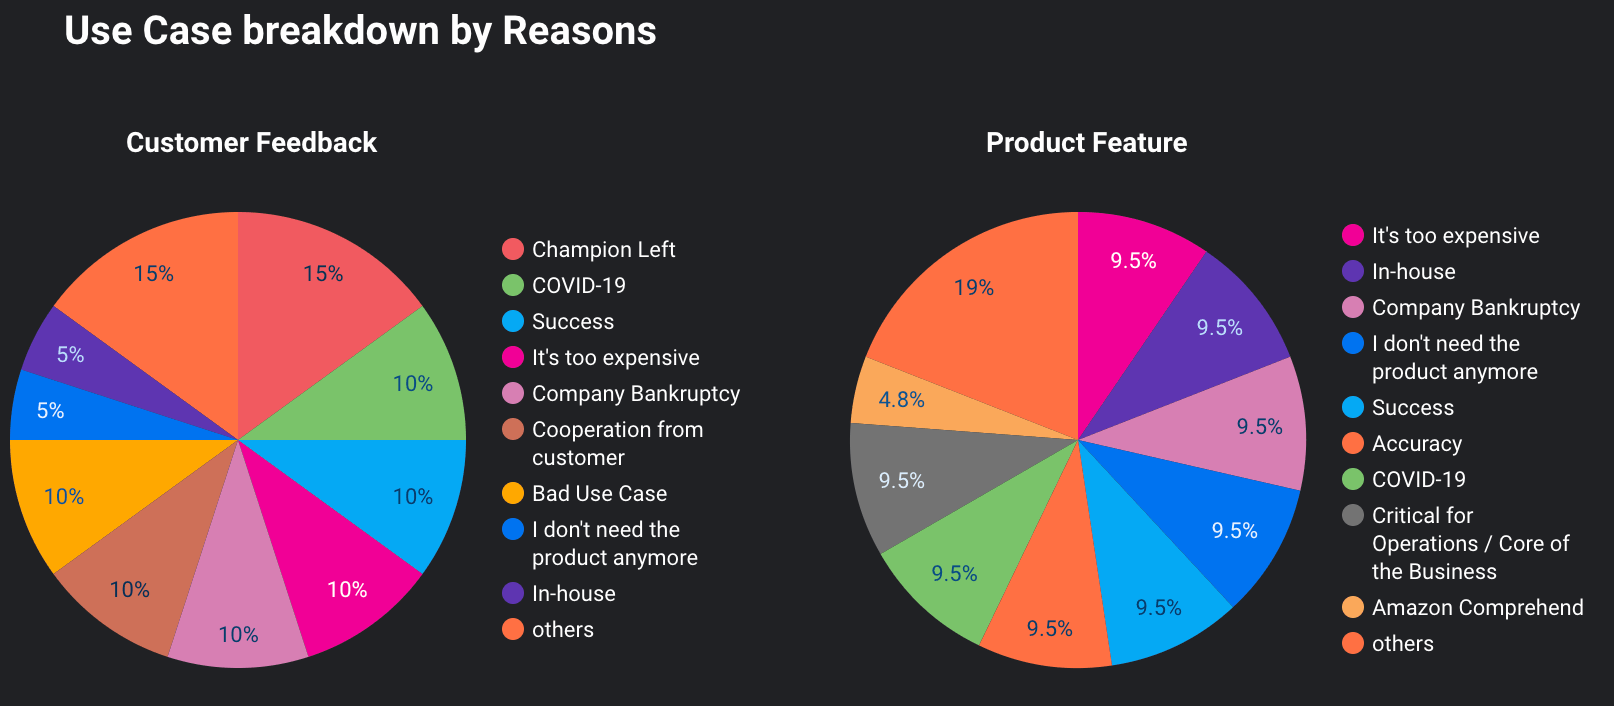 Customer churn analysis showing why customers left by Use Case breakdowns: Customer Feedback and Product Feature.